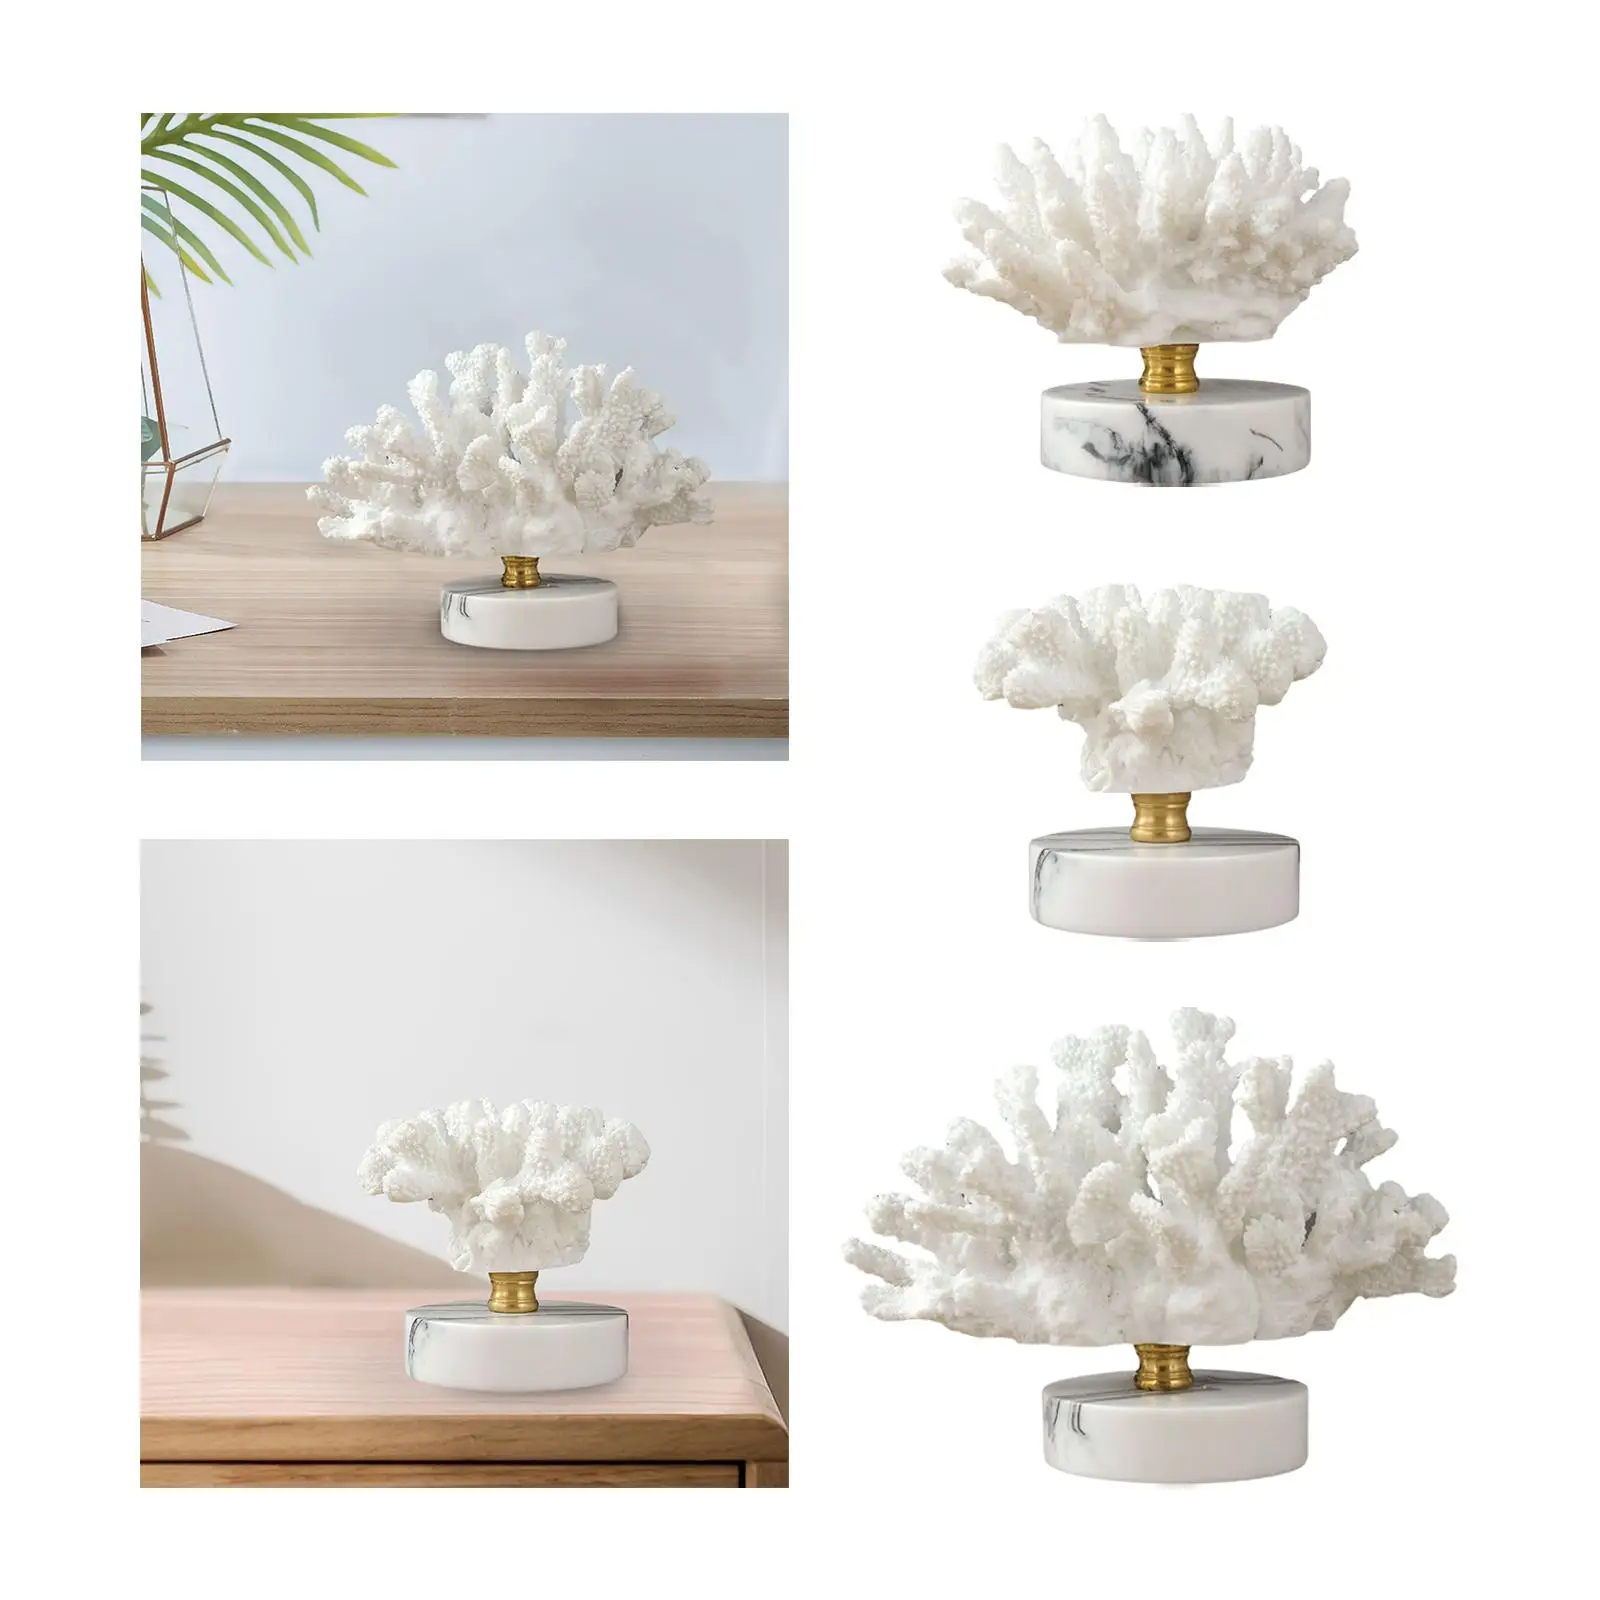 Artificial Coral Sculpture Crafts Marble Base Figurine Statue Arts Collection for Bookcase Bedroom Wedding Decoration Gift